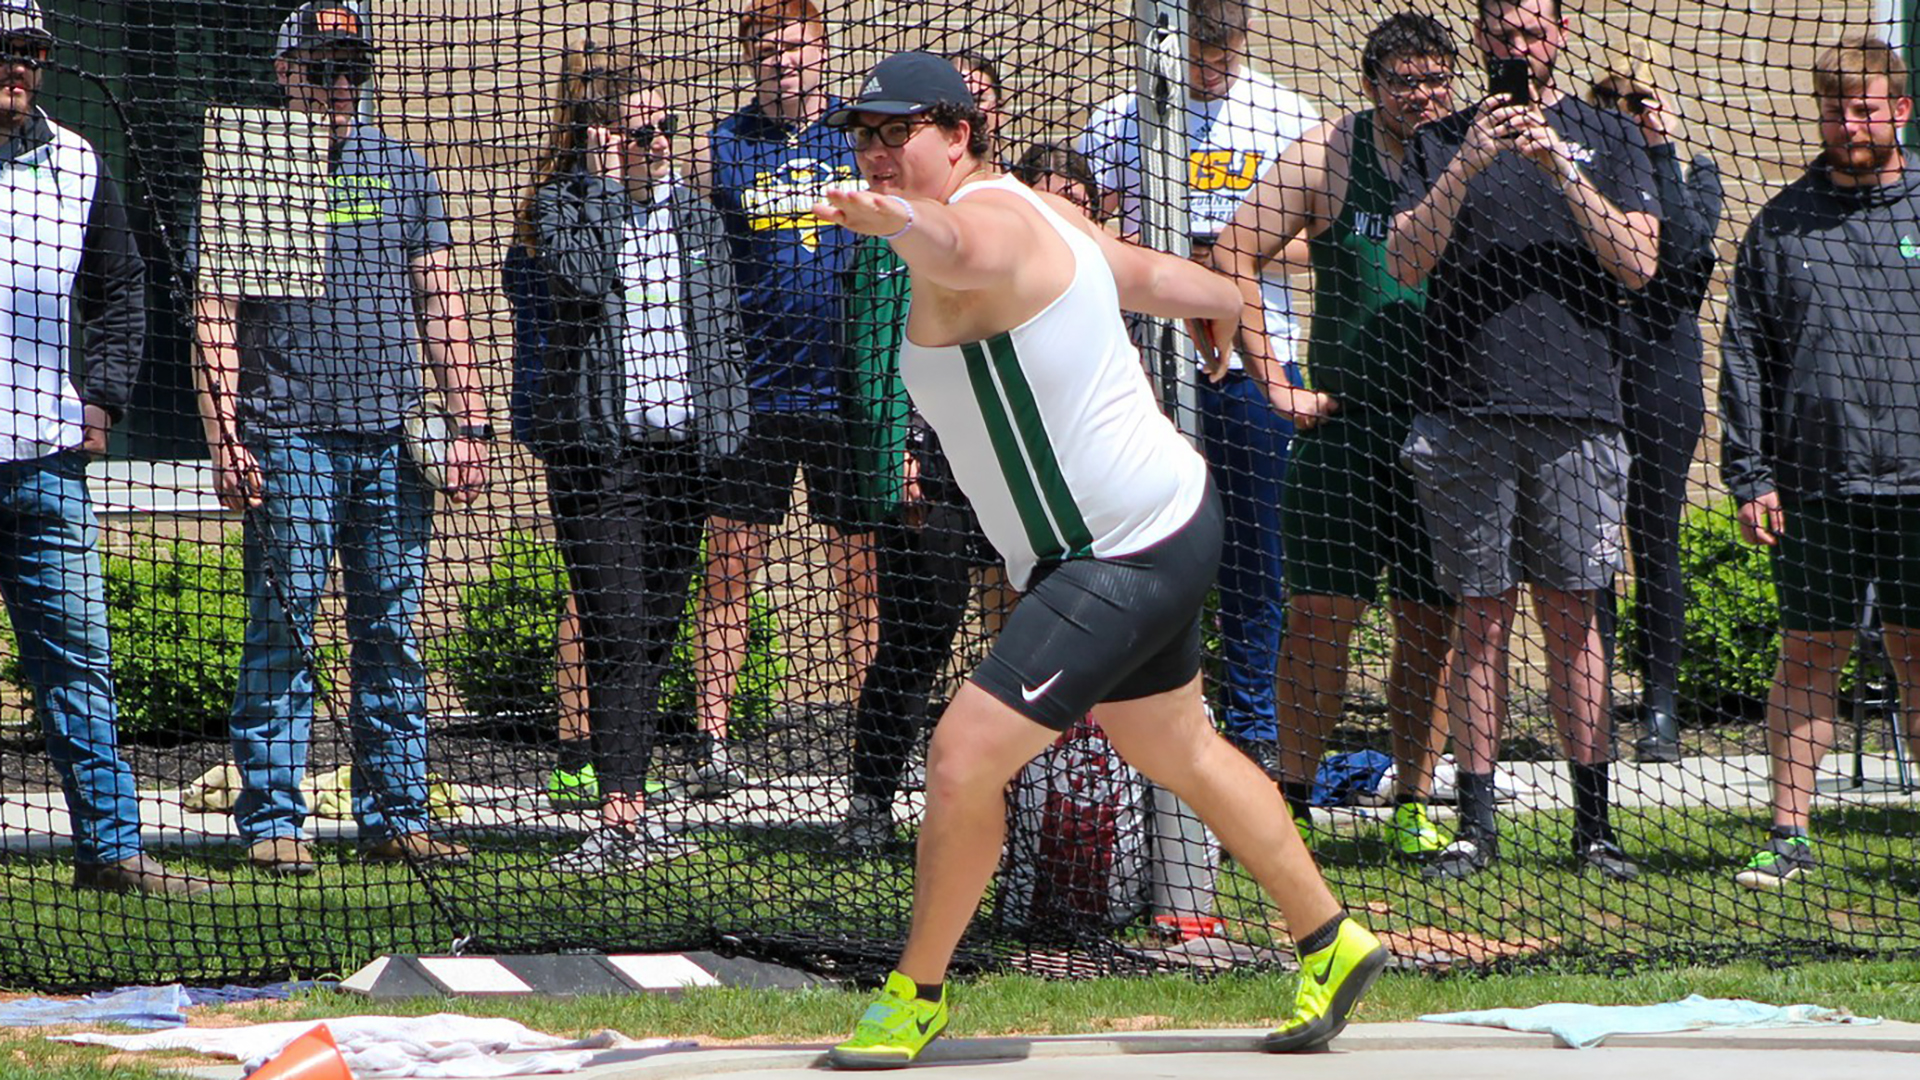 Throwers Dominate as Men's Track & Field Finishes Third in Outdoor Opener